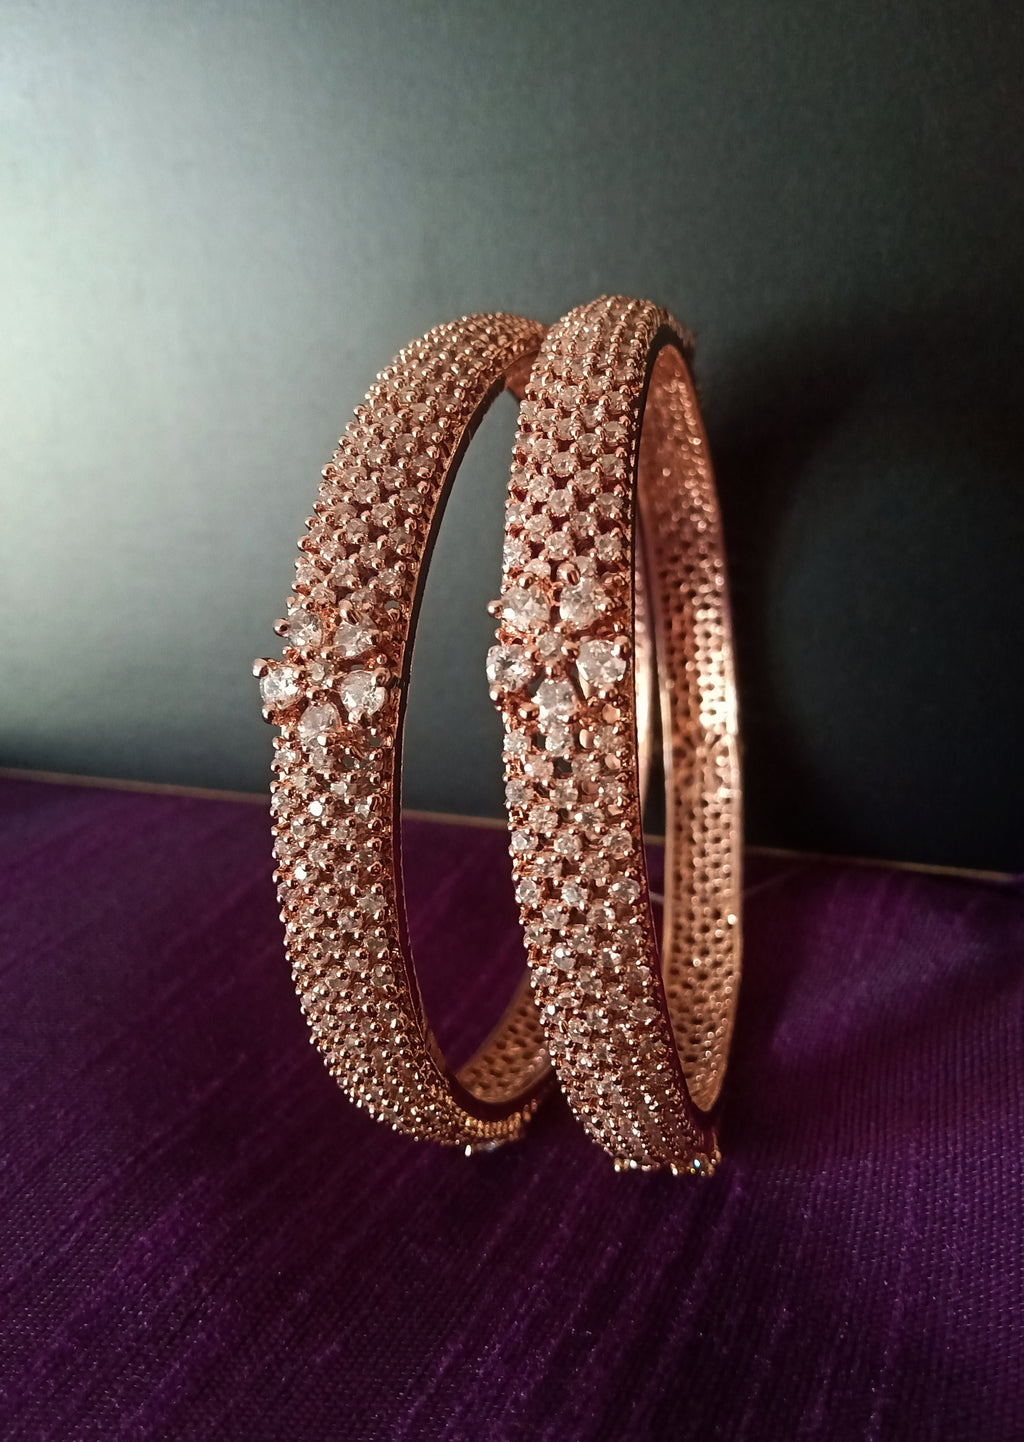 B0175_Elegant delicate crafted Rose gold bangles embellished with American Diamond stones.